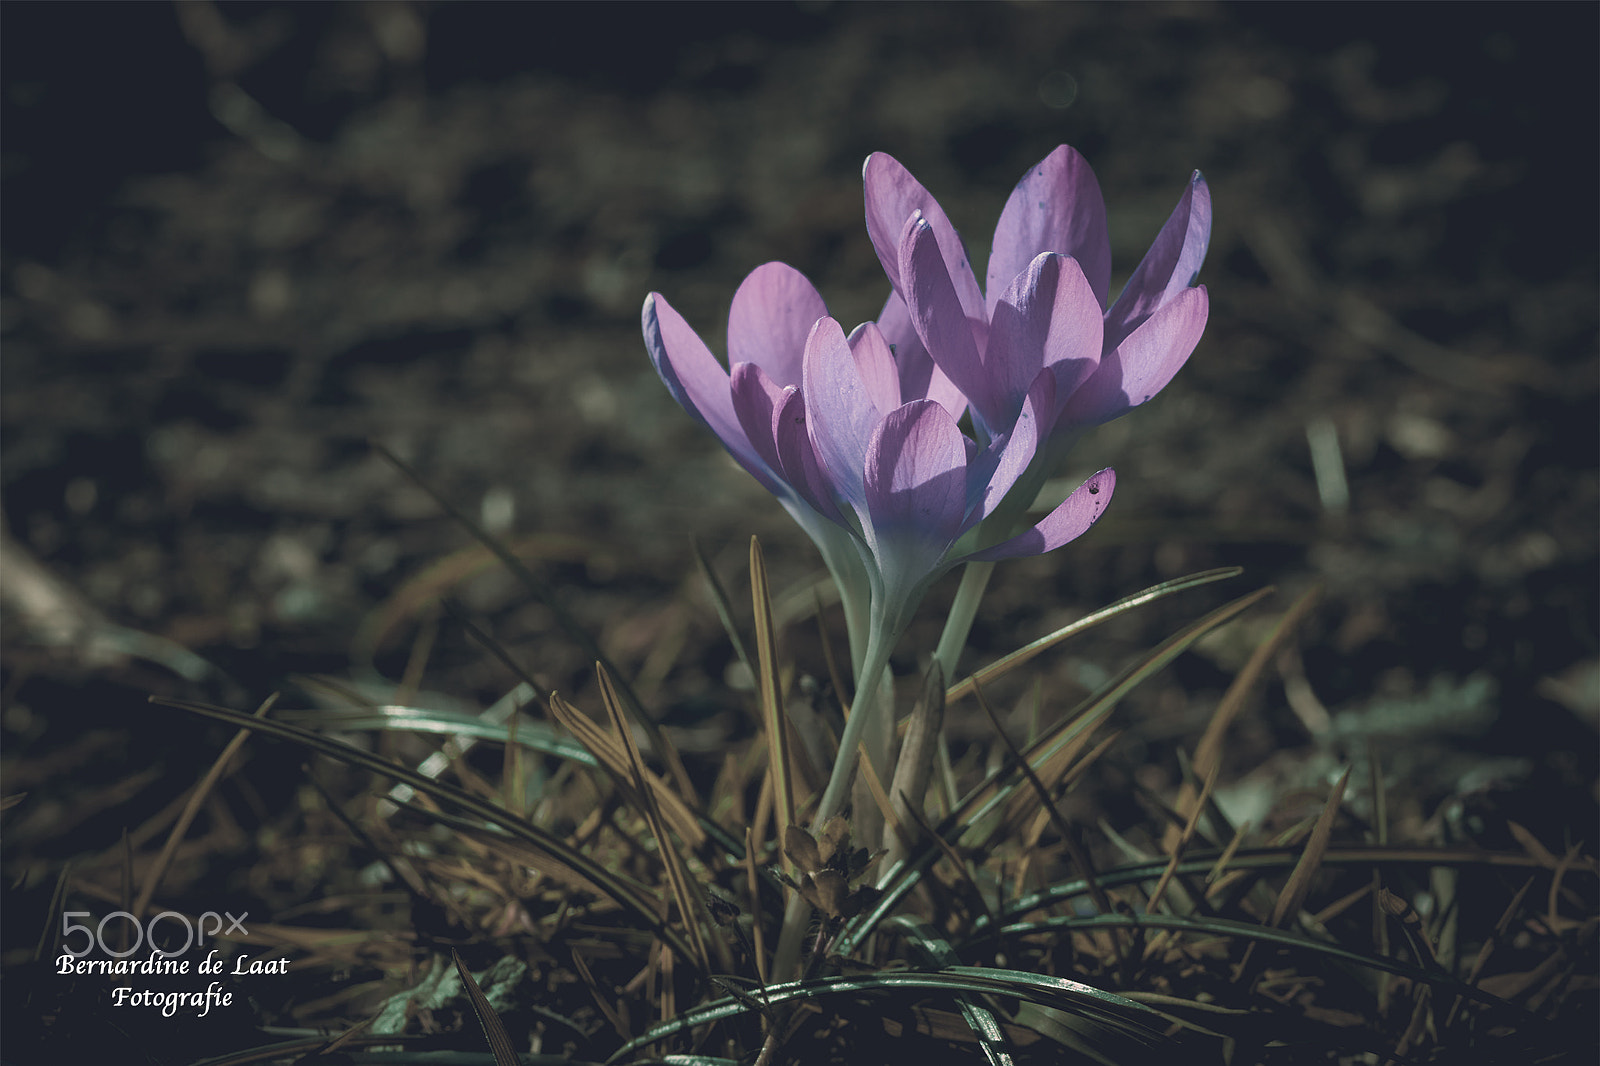 Nikon D7100 + Tamron SP 90mm F2.8 Di VC USD 1:1 Macro (F004) sample photo. Early spring flowers photography